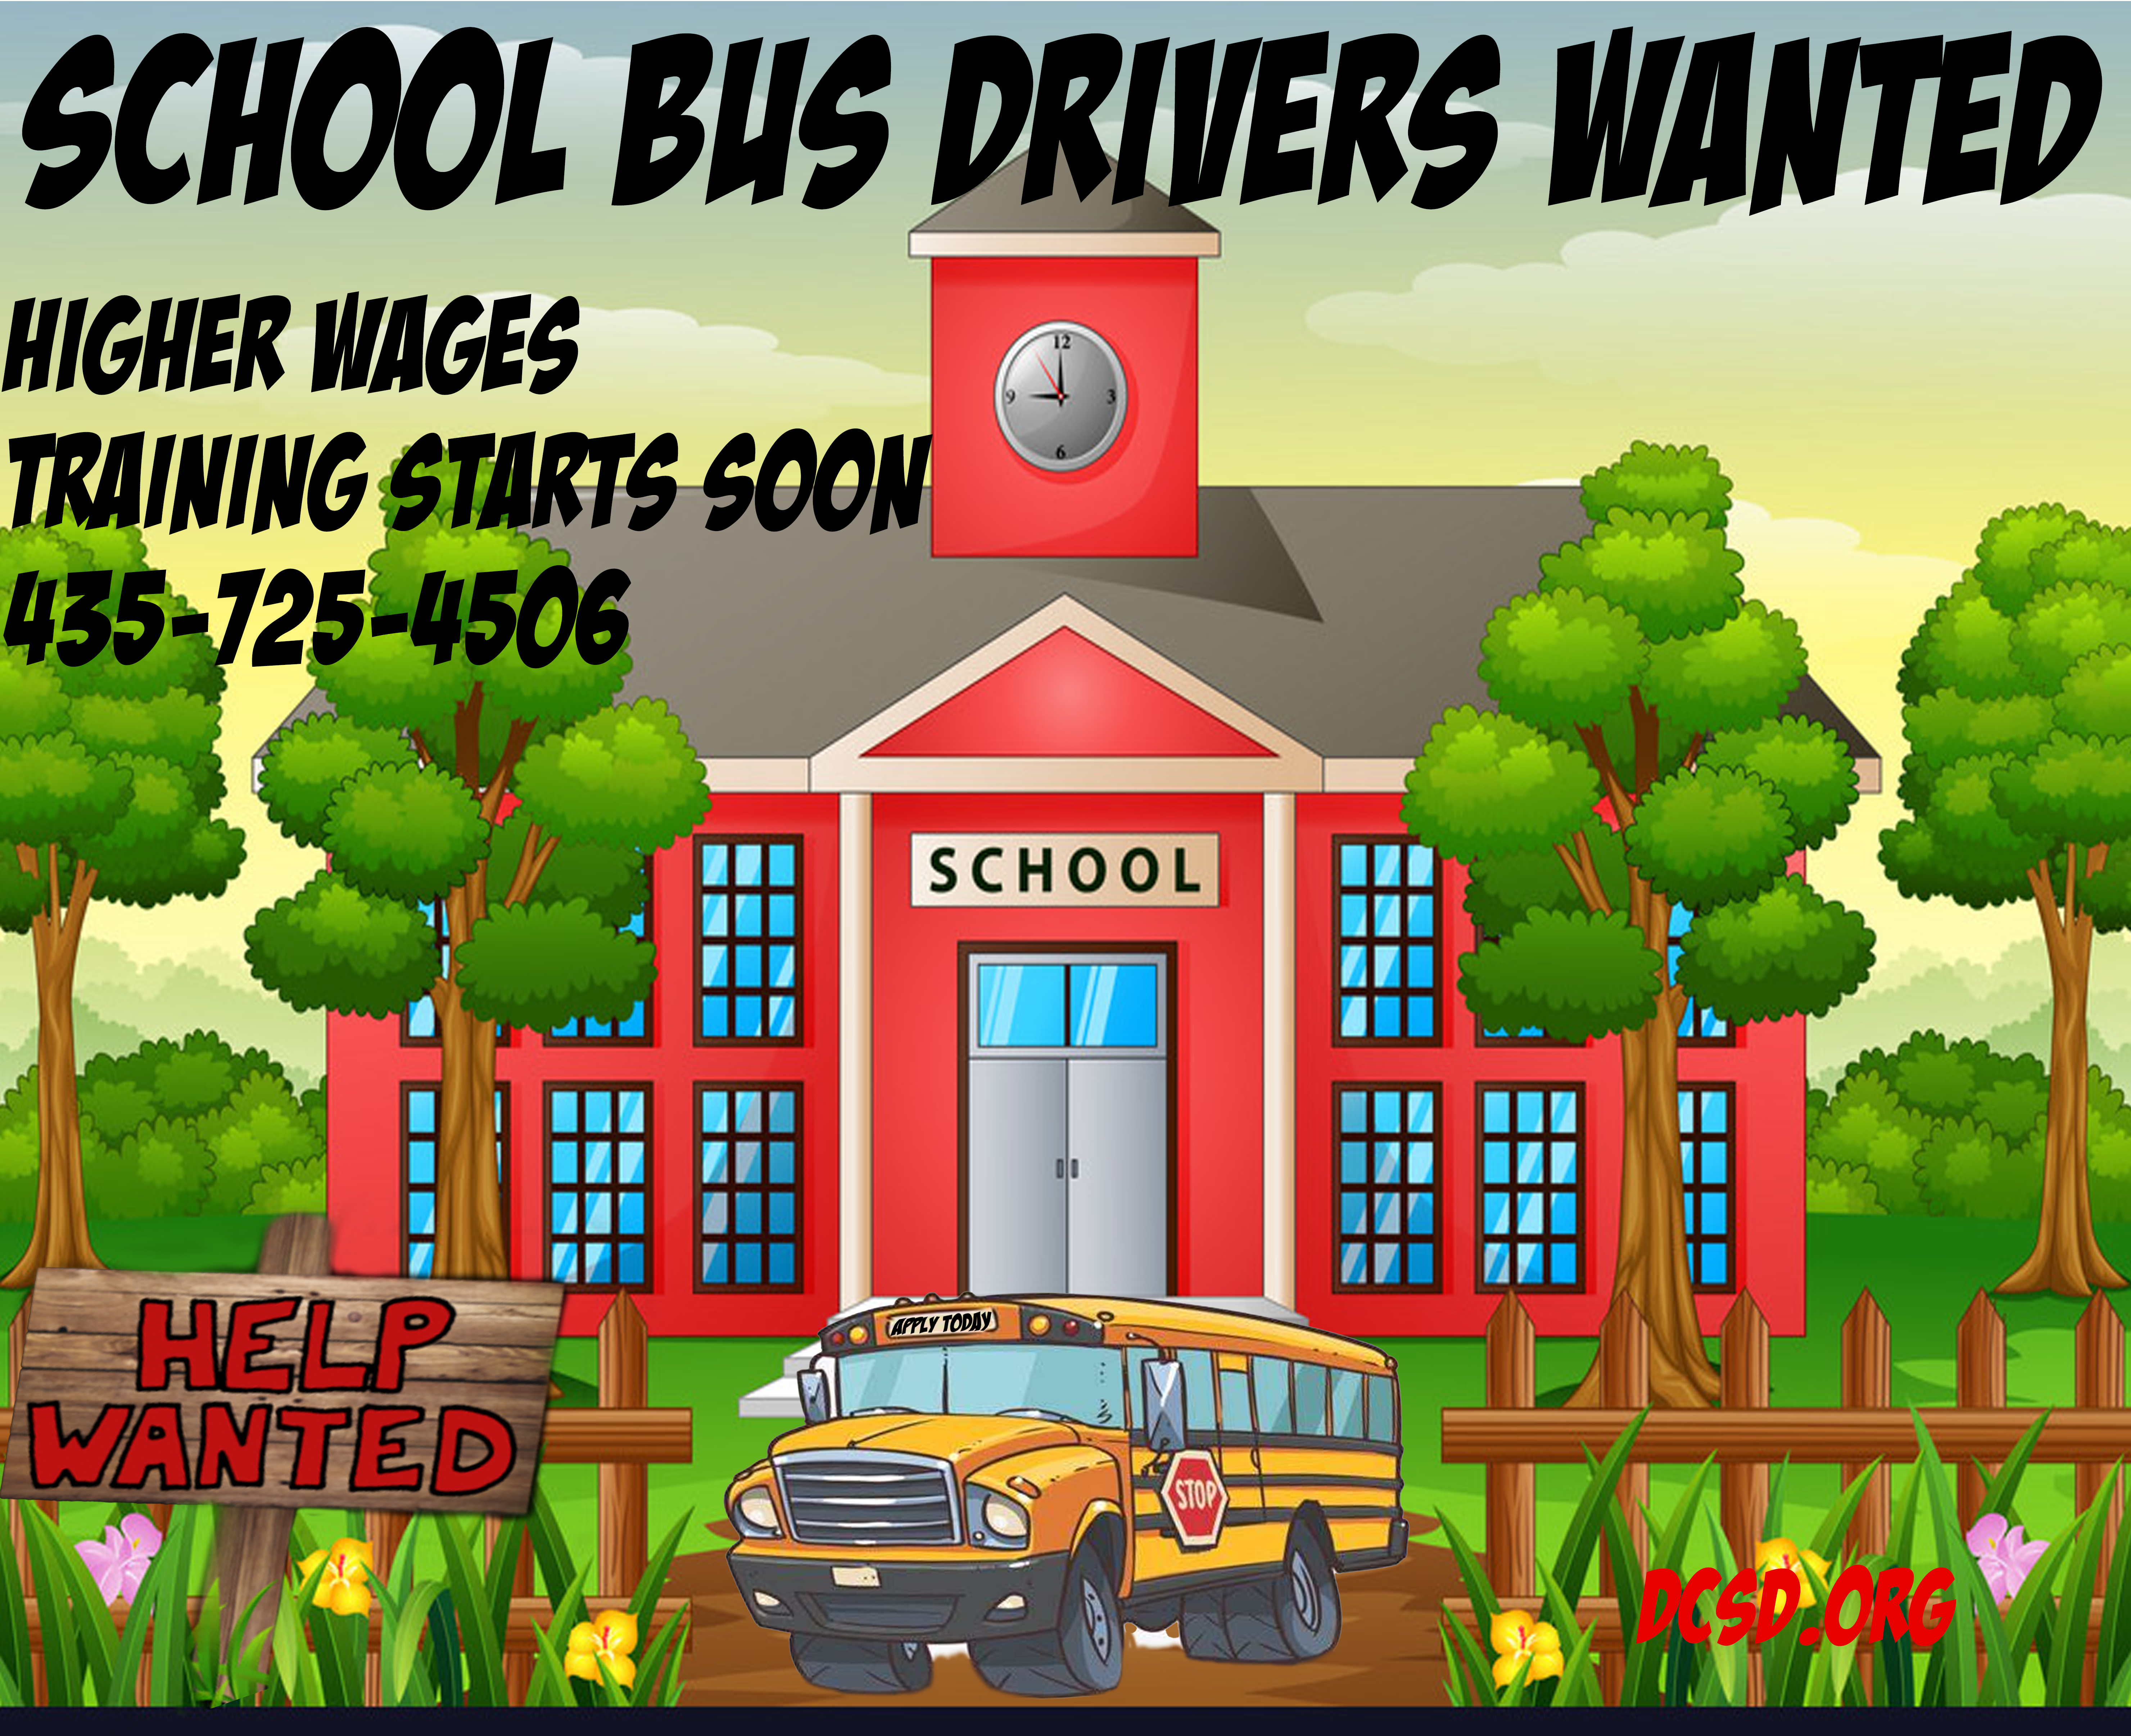 An ad for needed bus drivers.